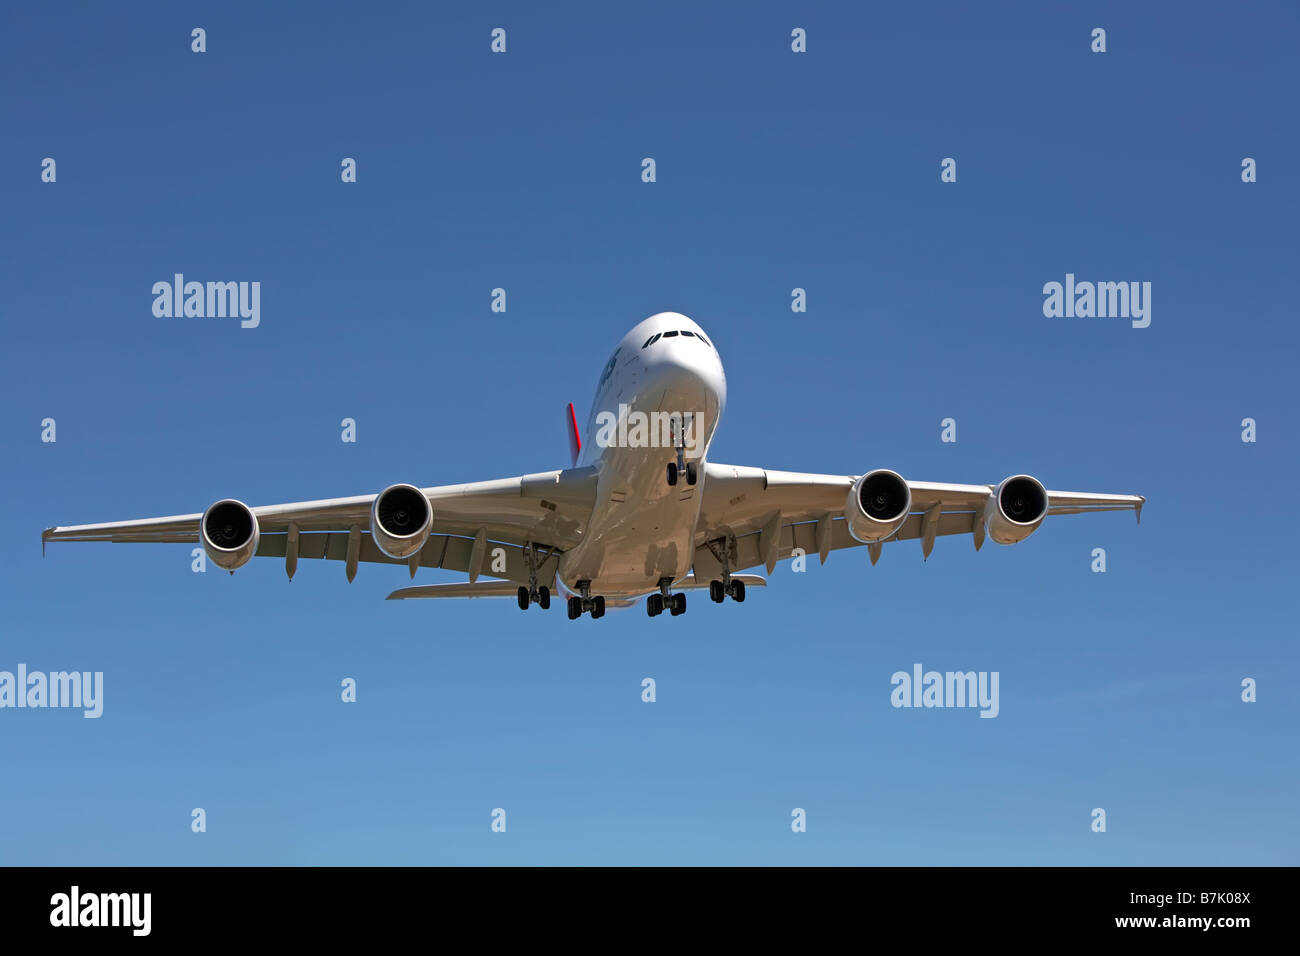 A380 on final approach Stock Photo